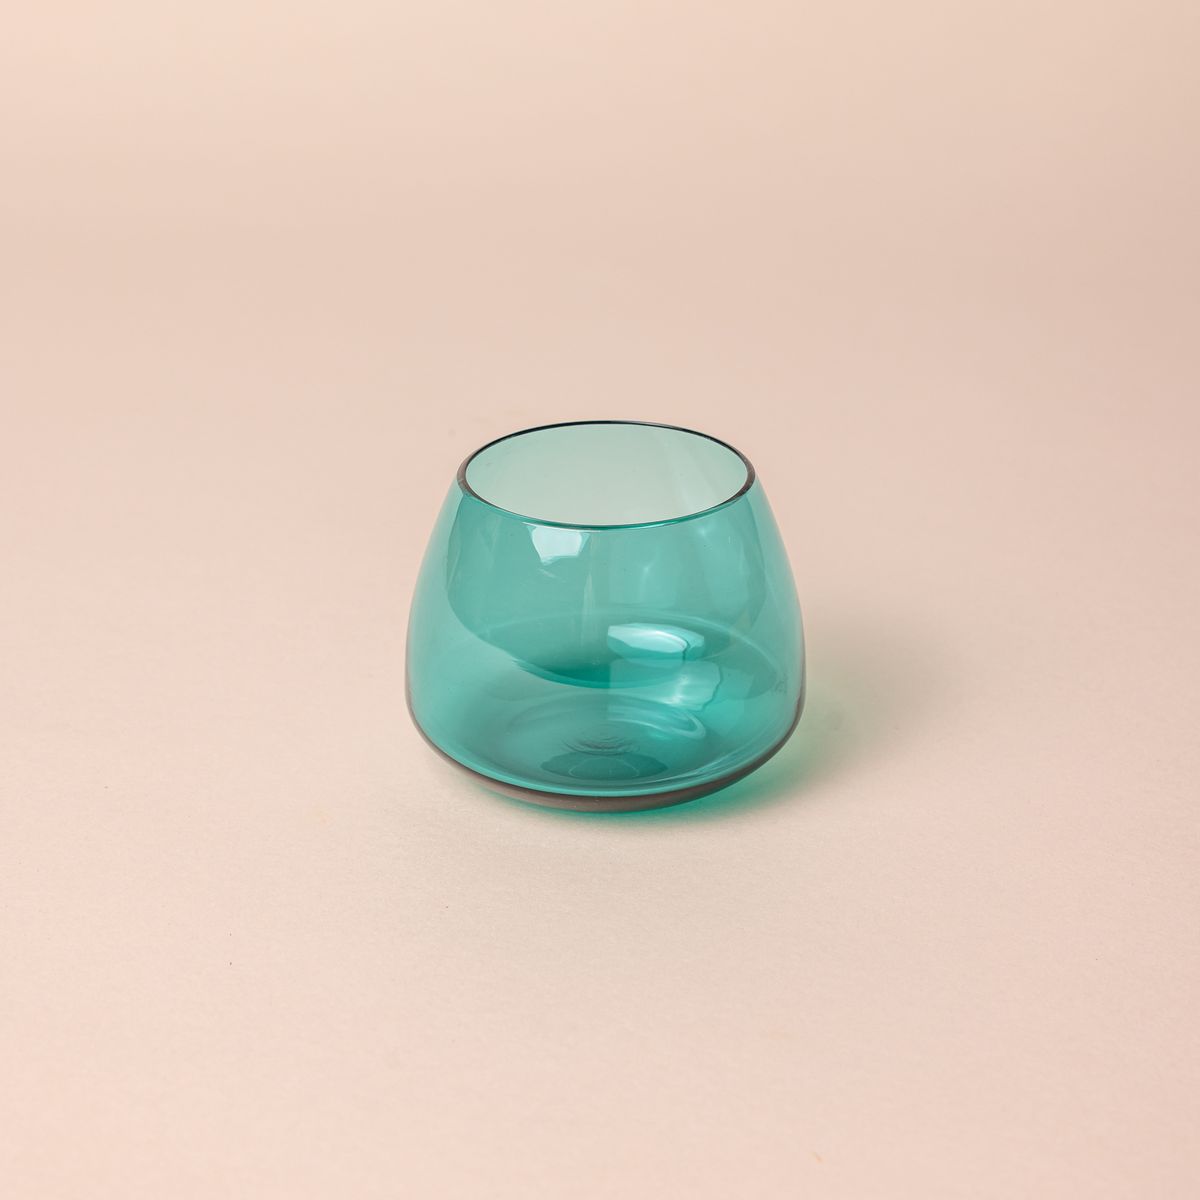 A round short aqua blue glass punch cup with a round base that narrows a bit near the top.